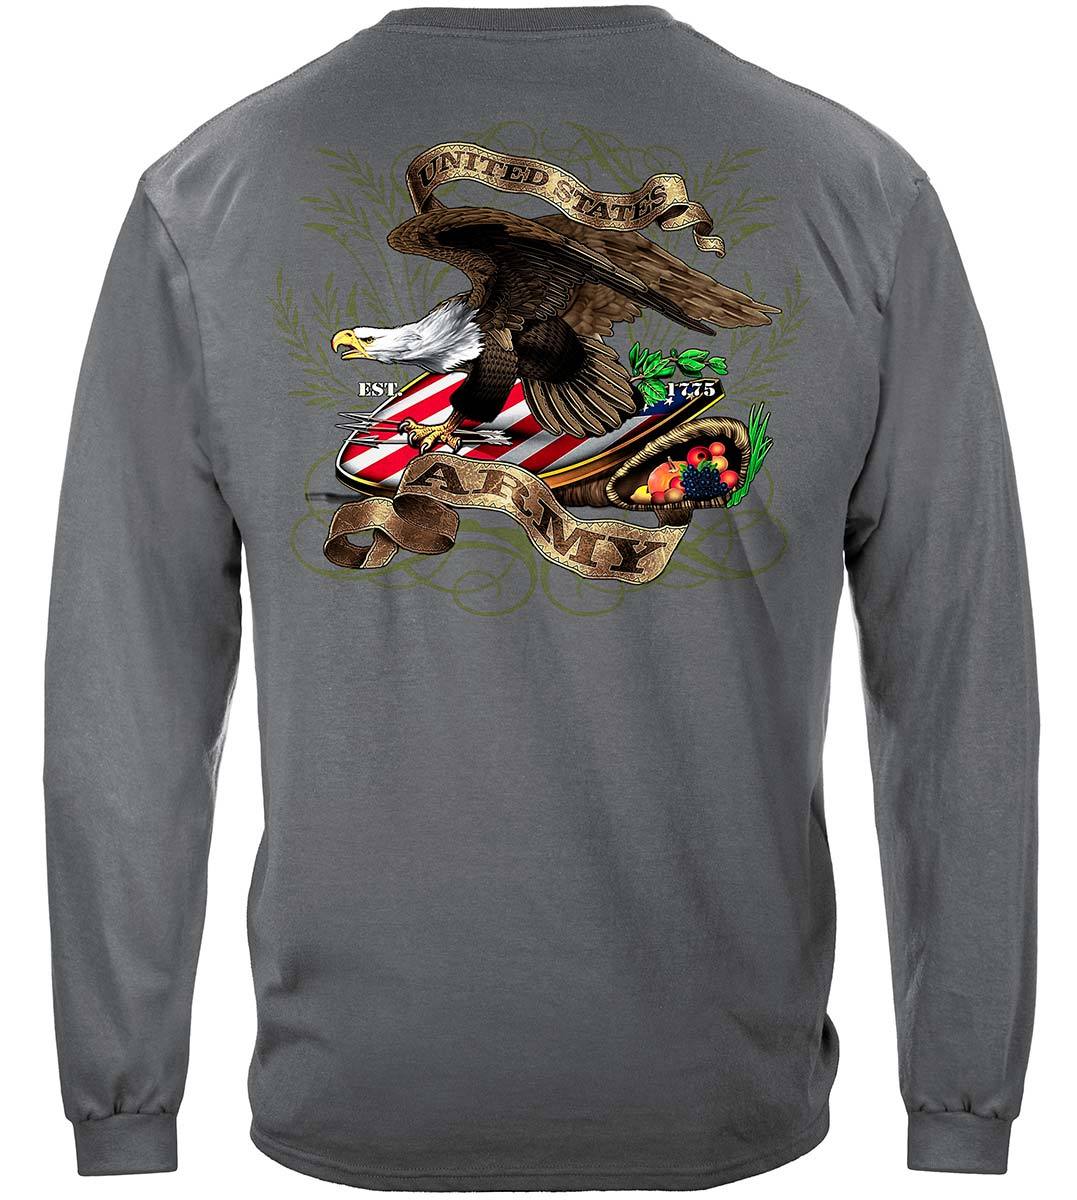 Army Shield And Eagle Premium Hooded Sweat Shirt